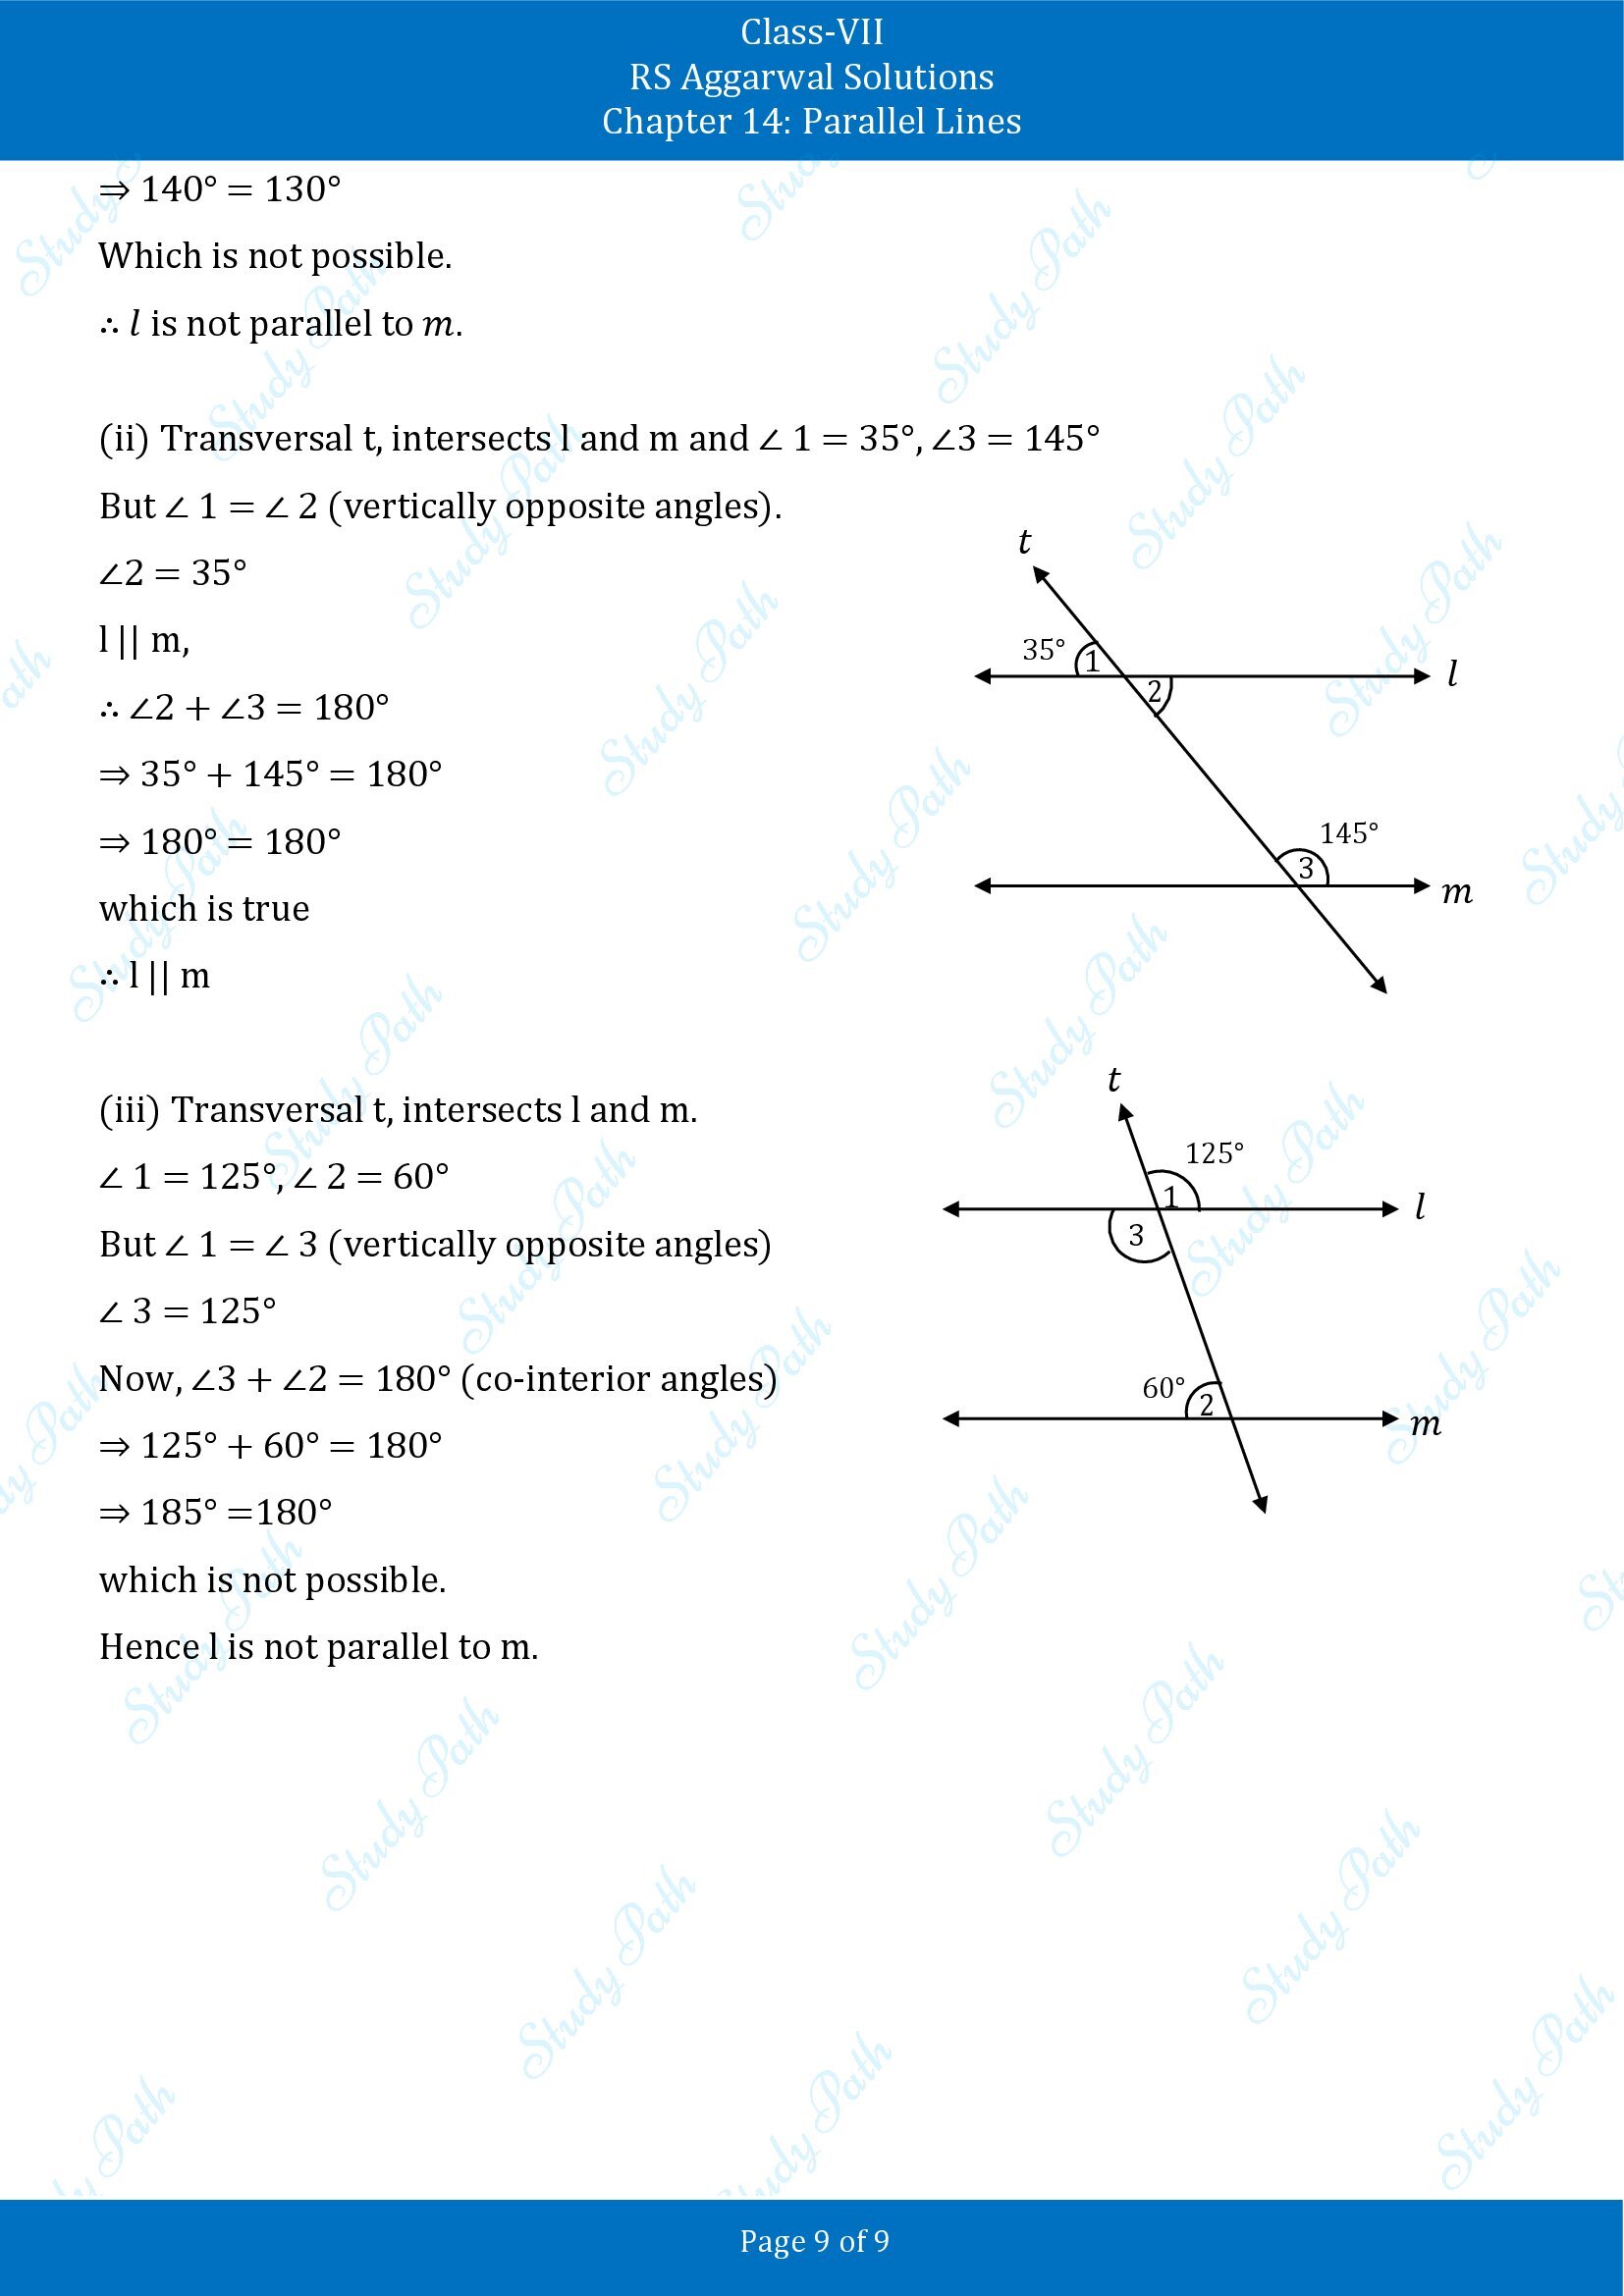 RS Aggarwal Solutions Class 7 Chapter 14 Parallel Lines 00009